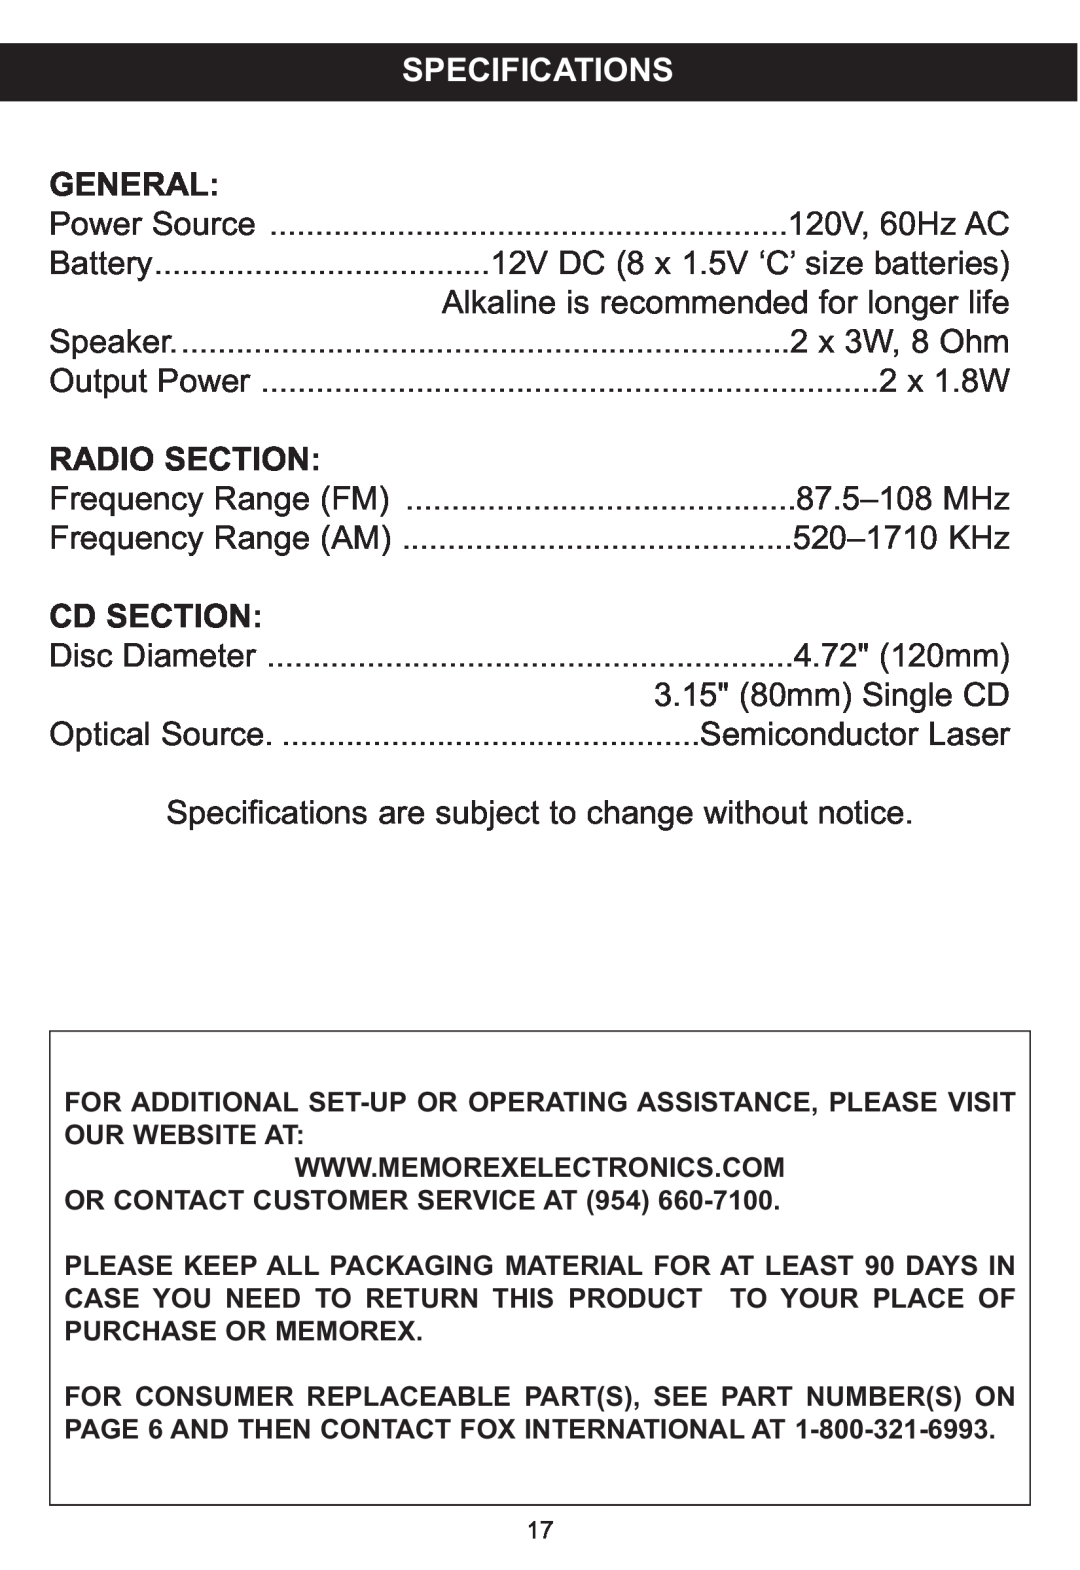 Memorex MP3848 manual Specifications, Radio Section 